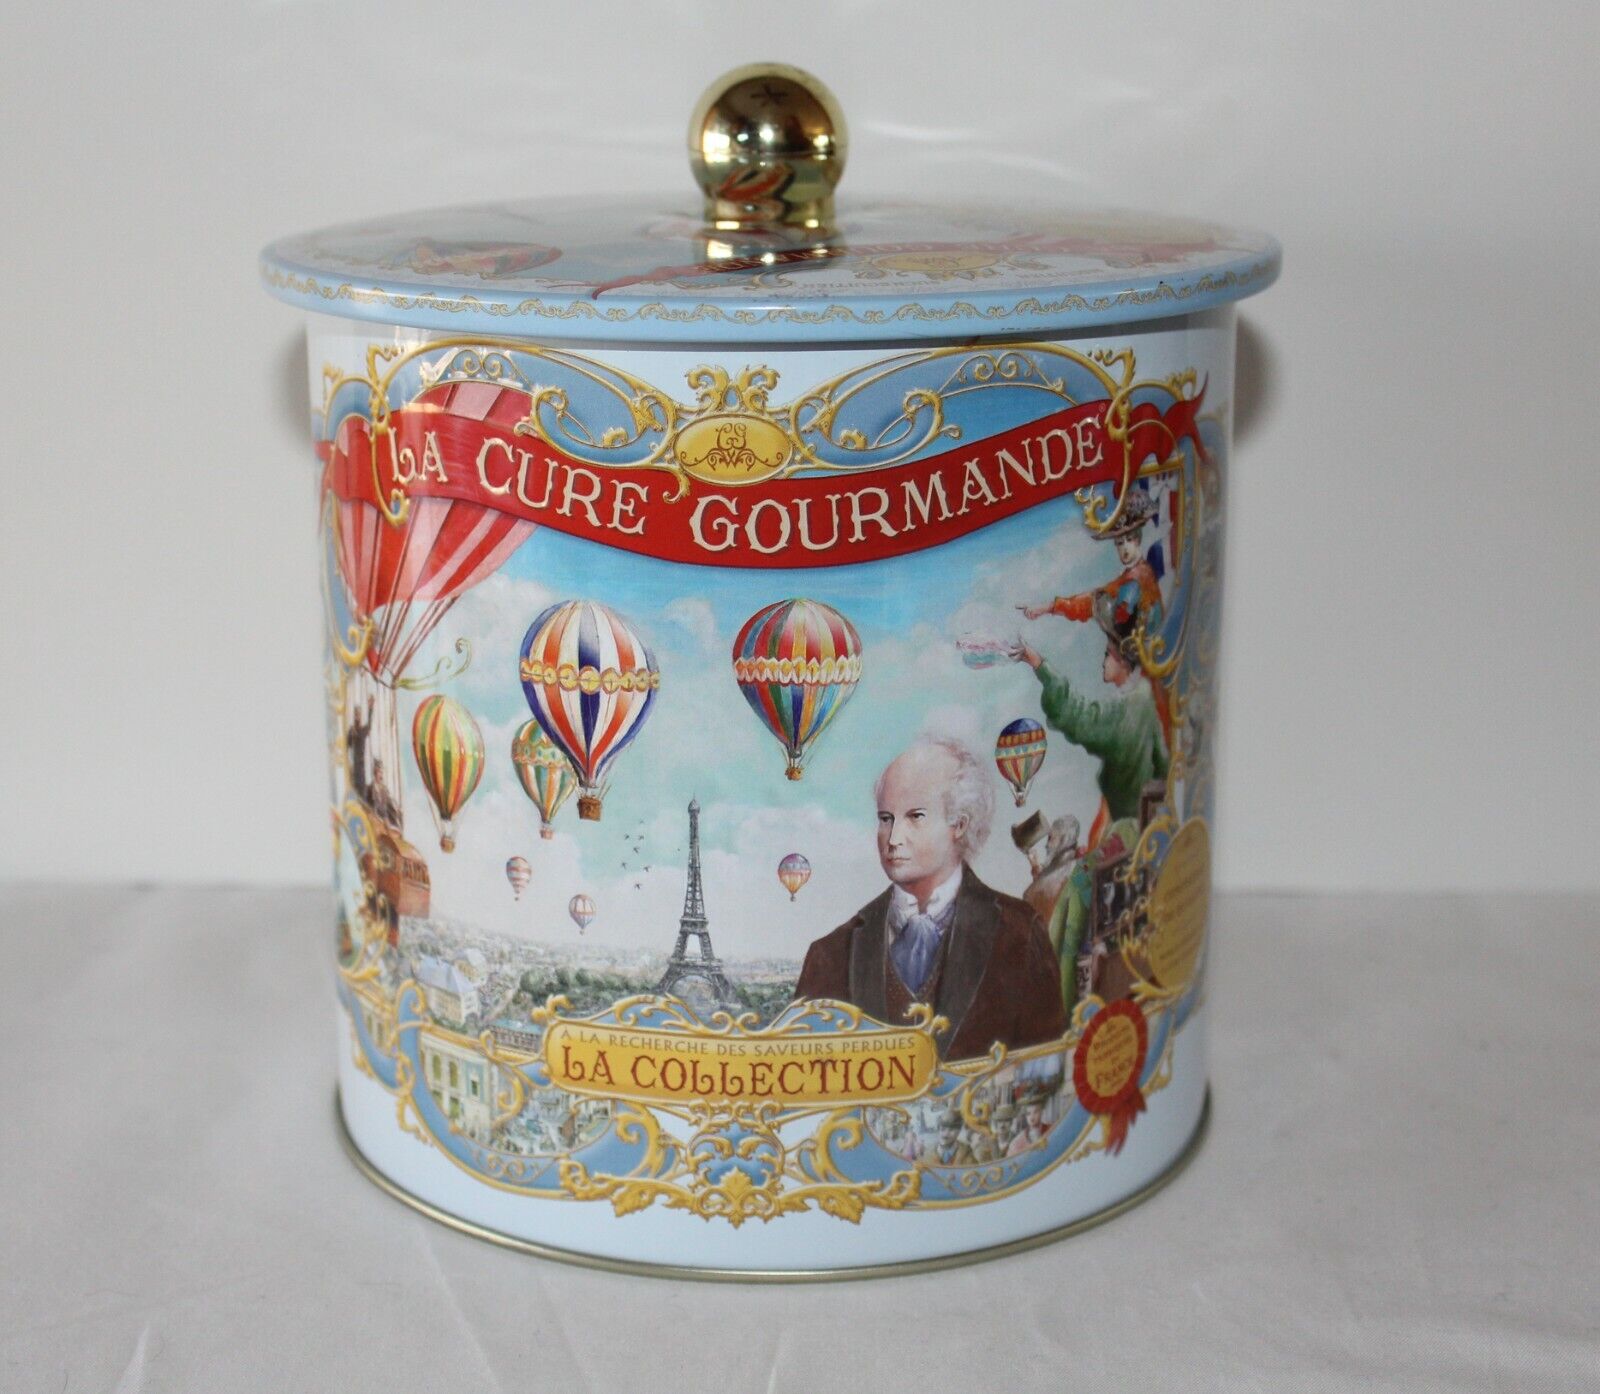 LA CURE GOURMANDE FRENCH BISCUIT TIN - HOT AIR BALLOON FRENCH SCENE